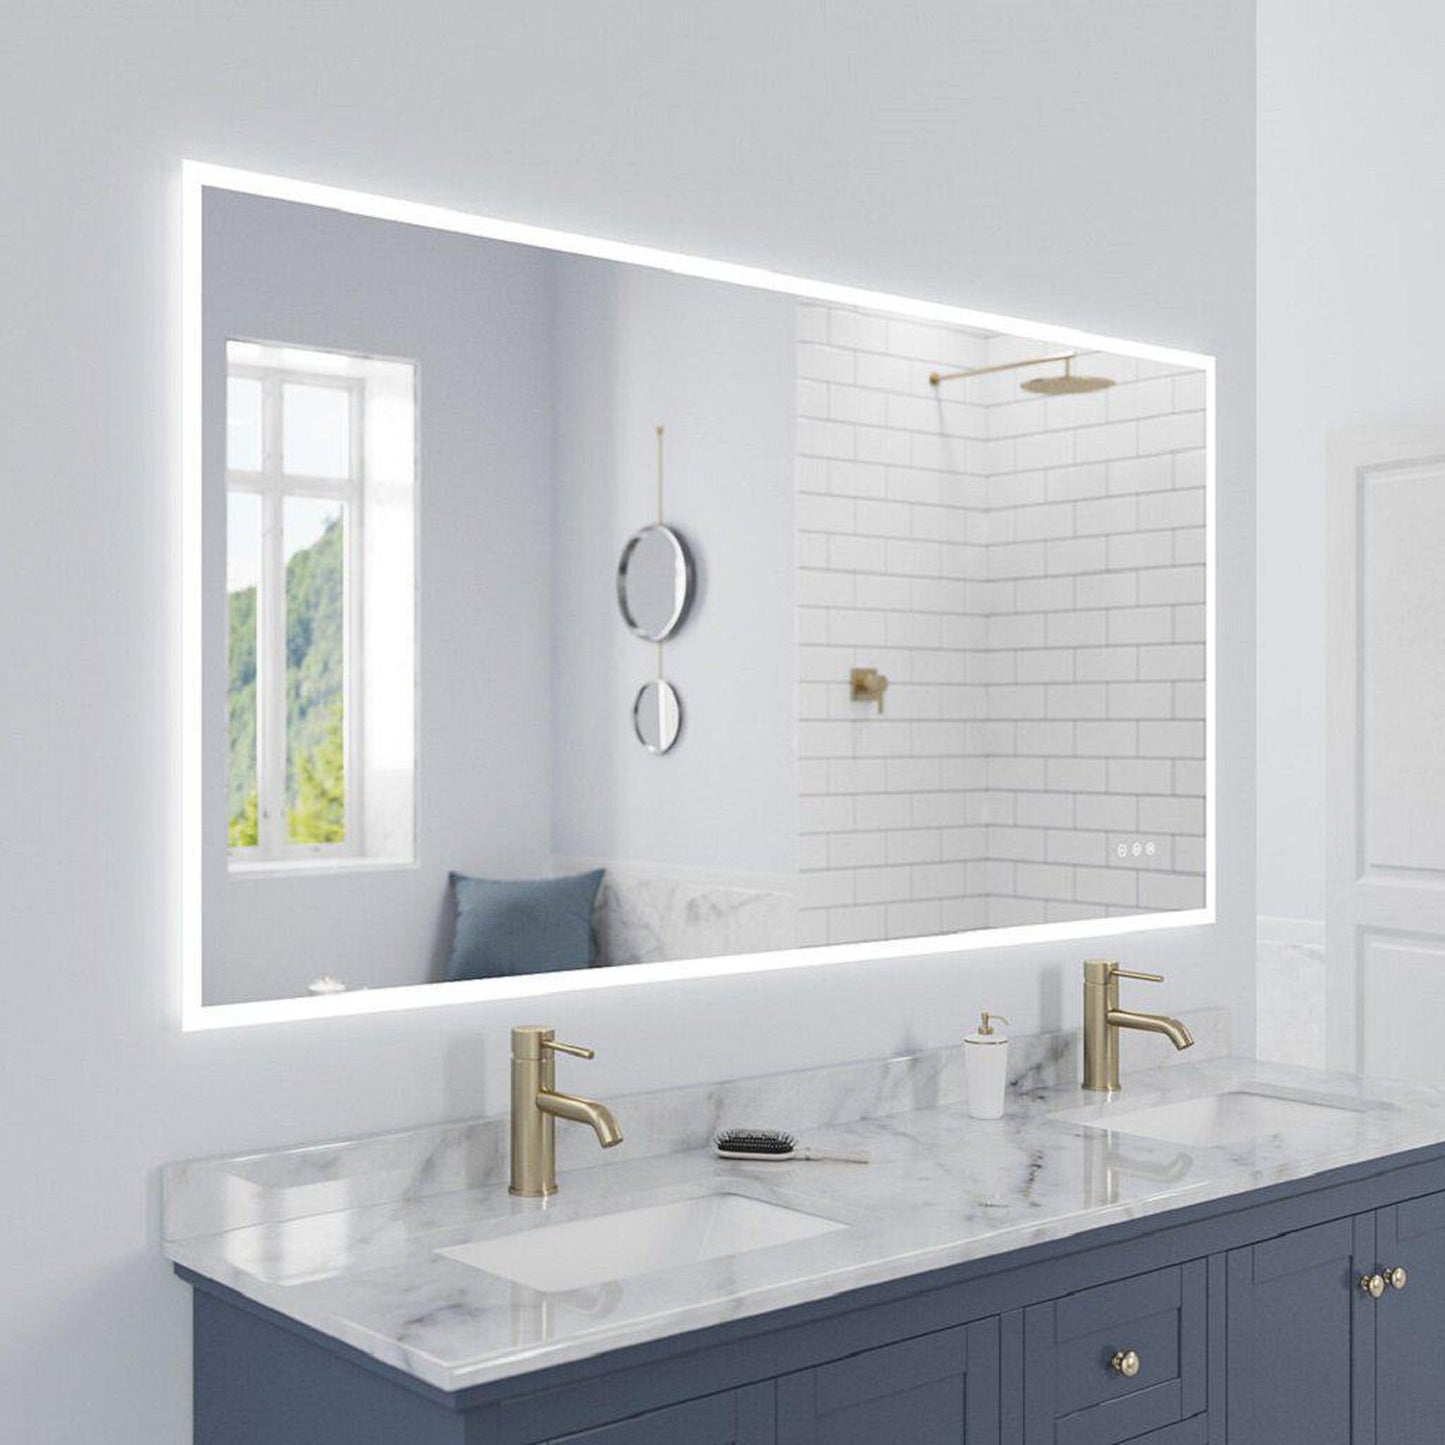 Luxaar Lucent 70" x 36" Wall-Mounted LED Vanity Mirror With Color Changer, Memory Dimmer & Defogger